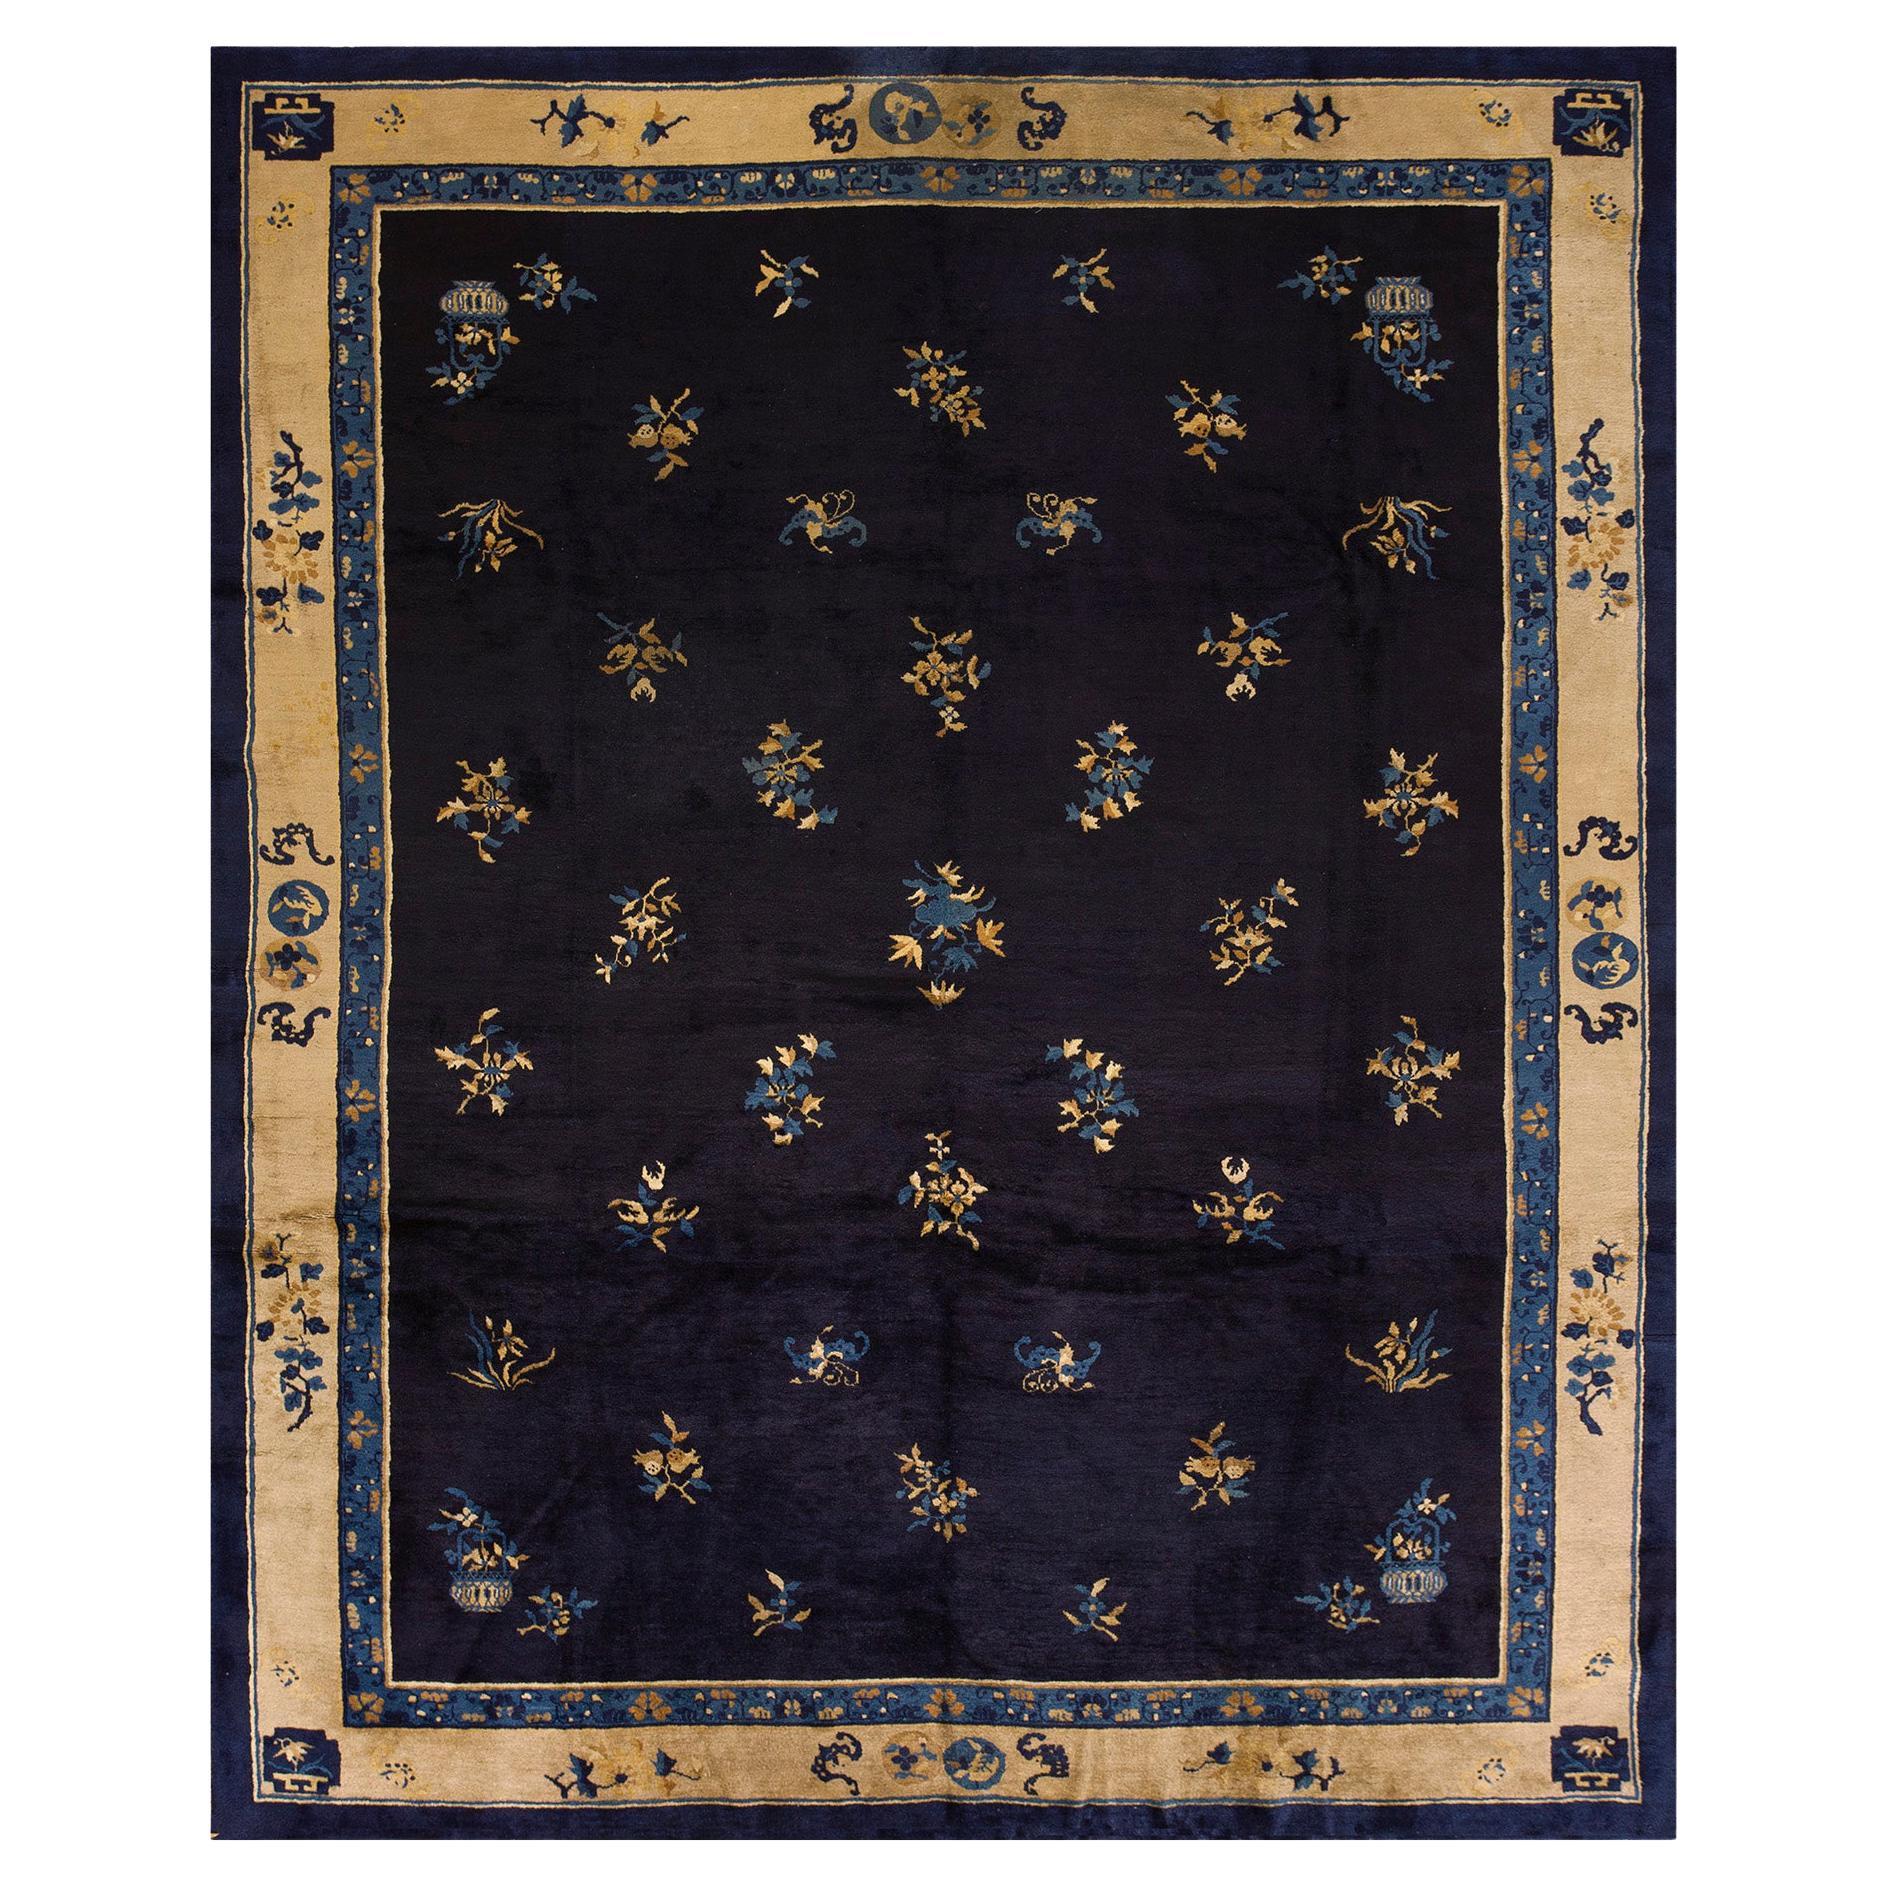 Late 19th Century Chinese Peking Carpet ( 9'6" x 11'7" - 290 x 353 ) For Sale